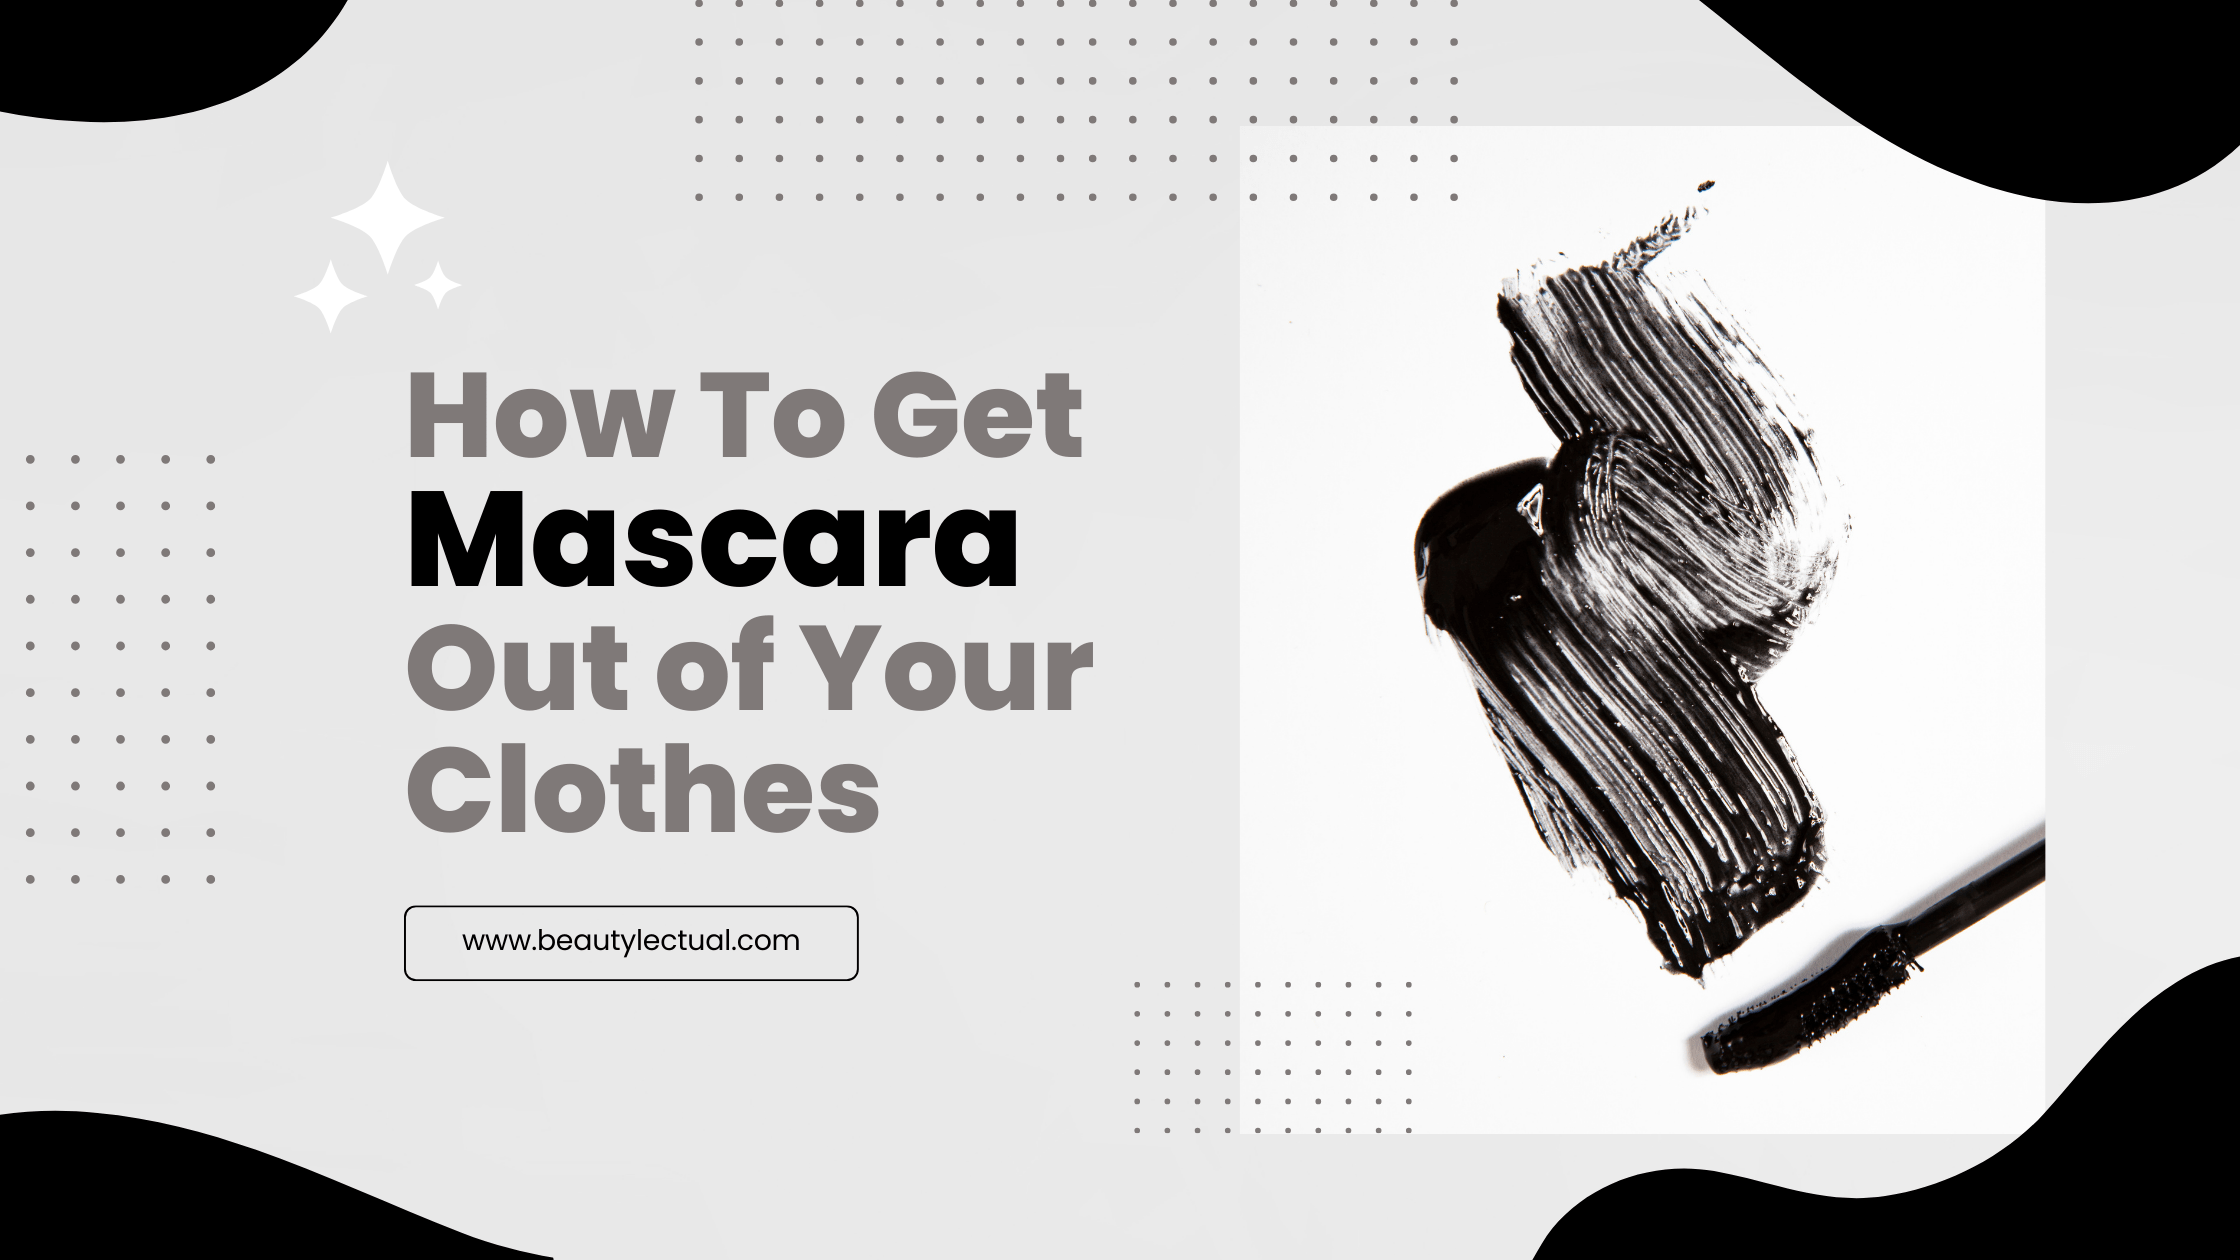 How To Get Mascara Out of Your Clothes